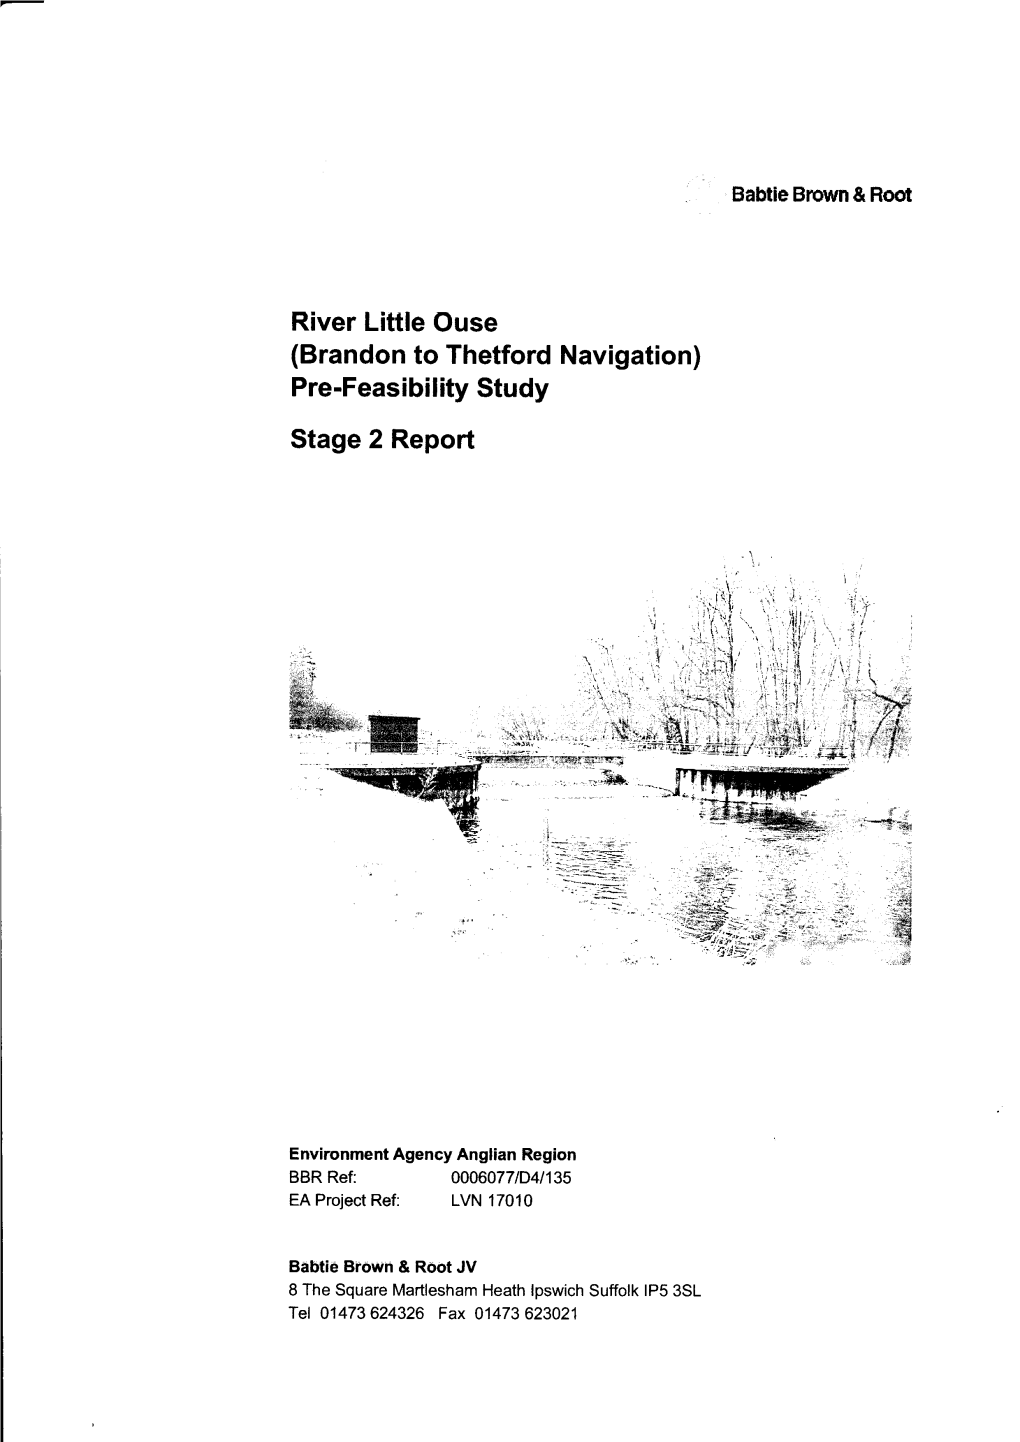 River Little Ouse Brandon to Thetford Prefeasibility Study - Stage 2 Report